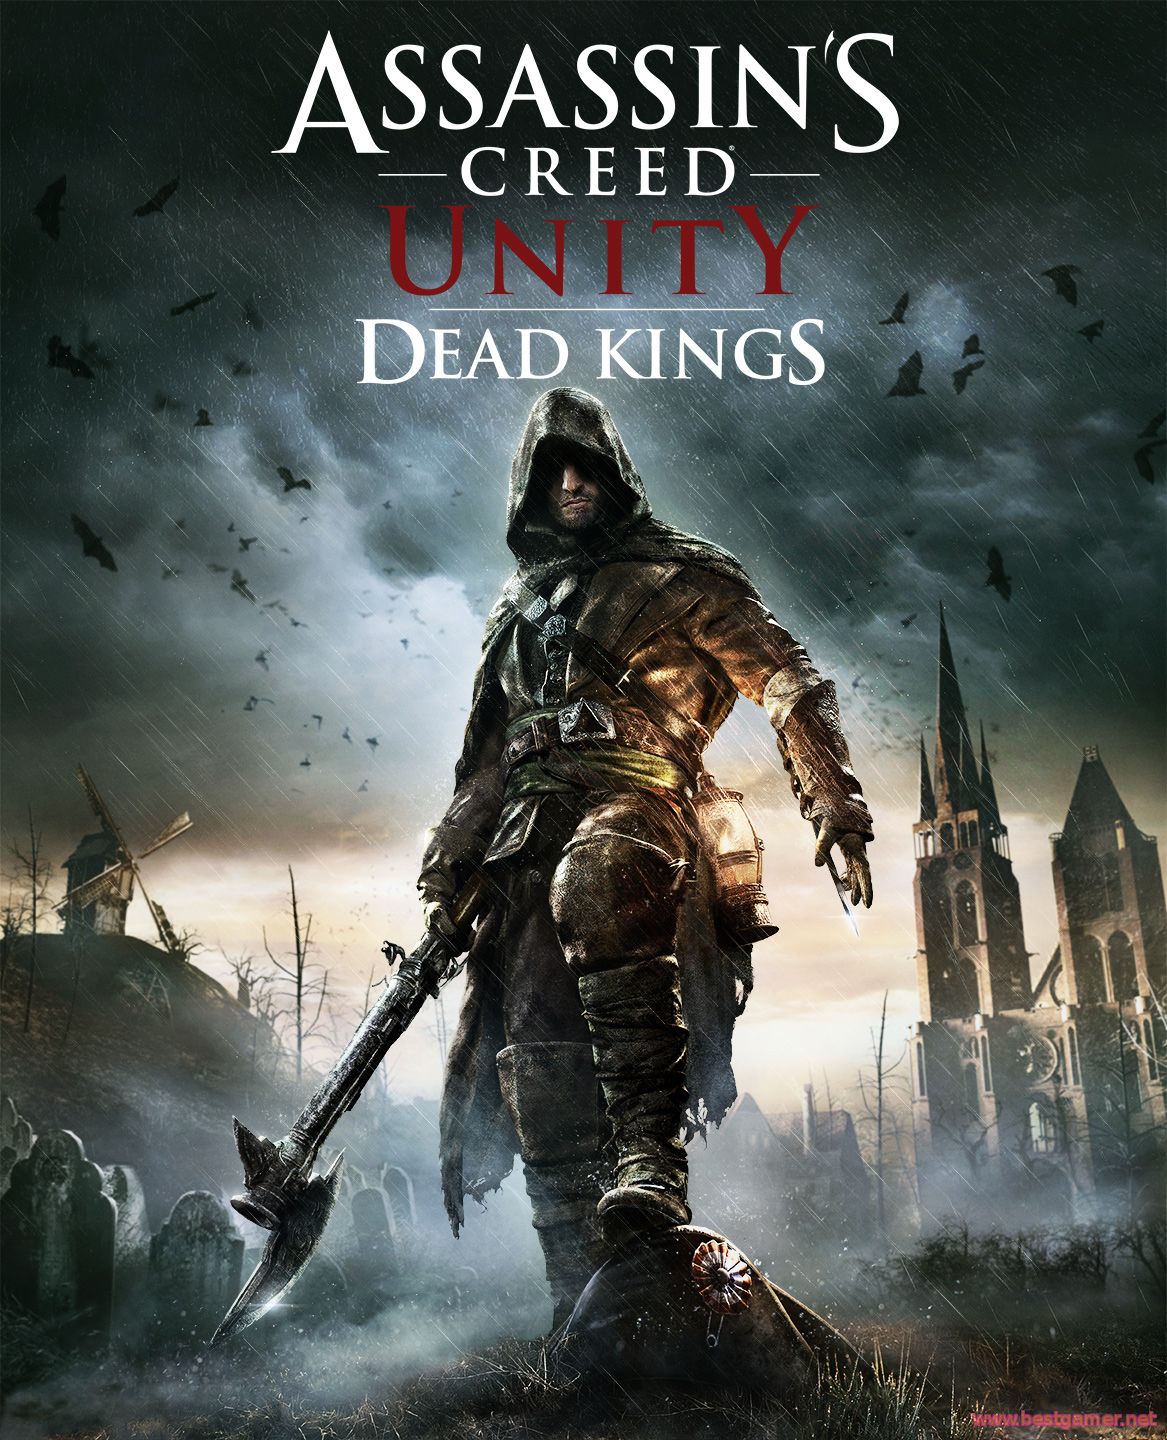 Assassin’s Creed Unity Dead Kings DLC - FTS